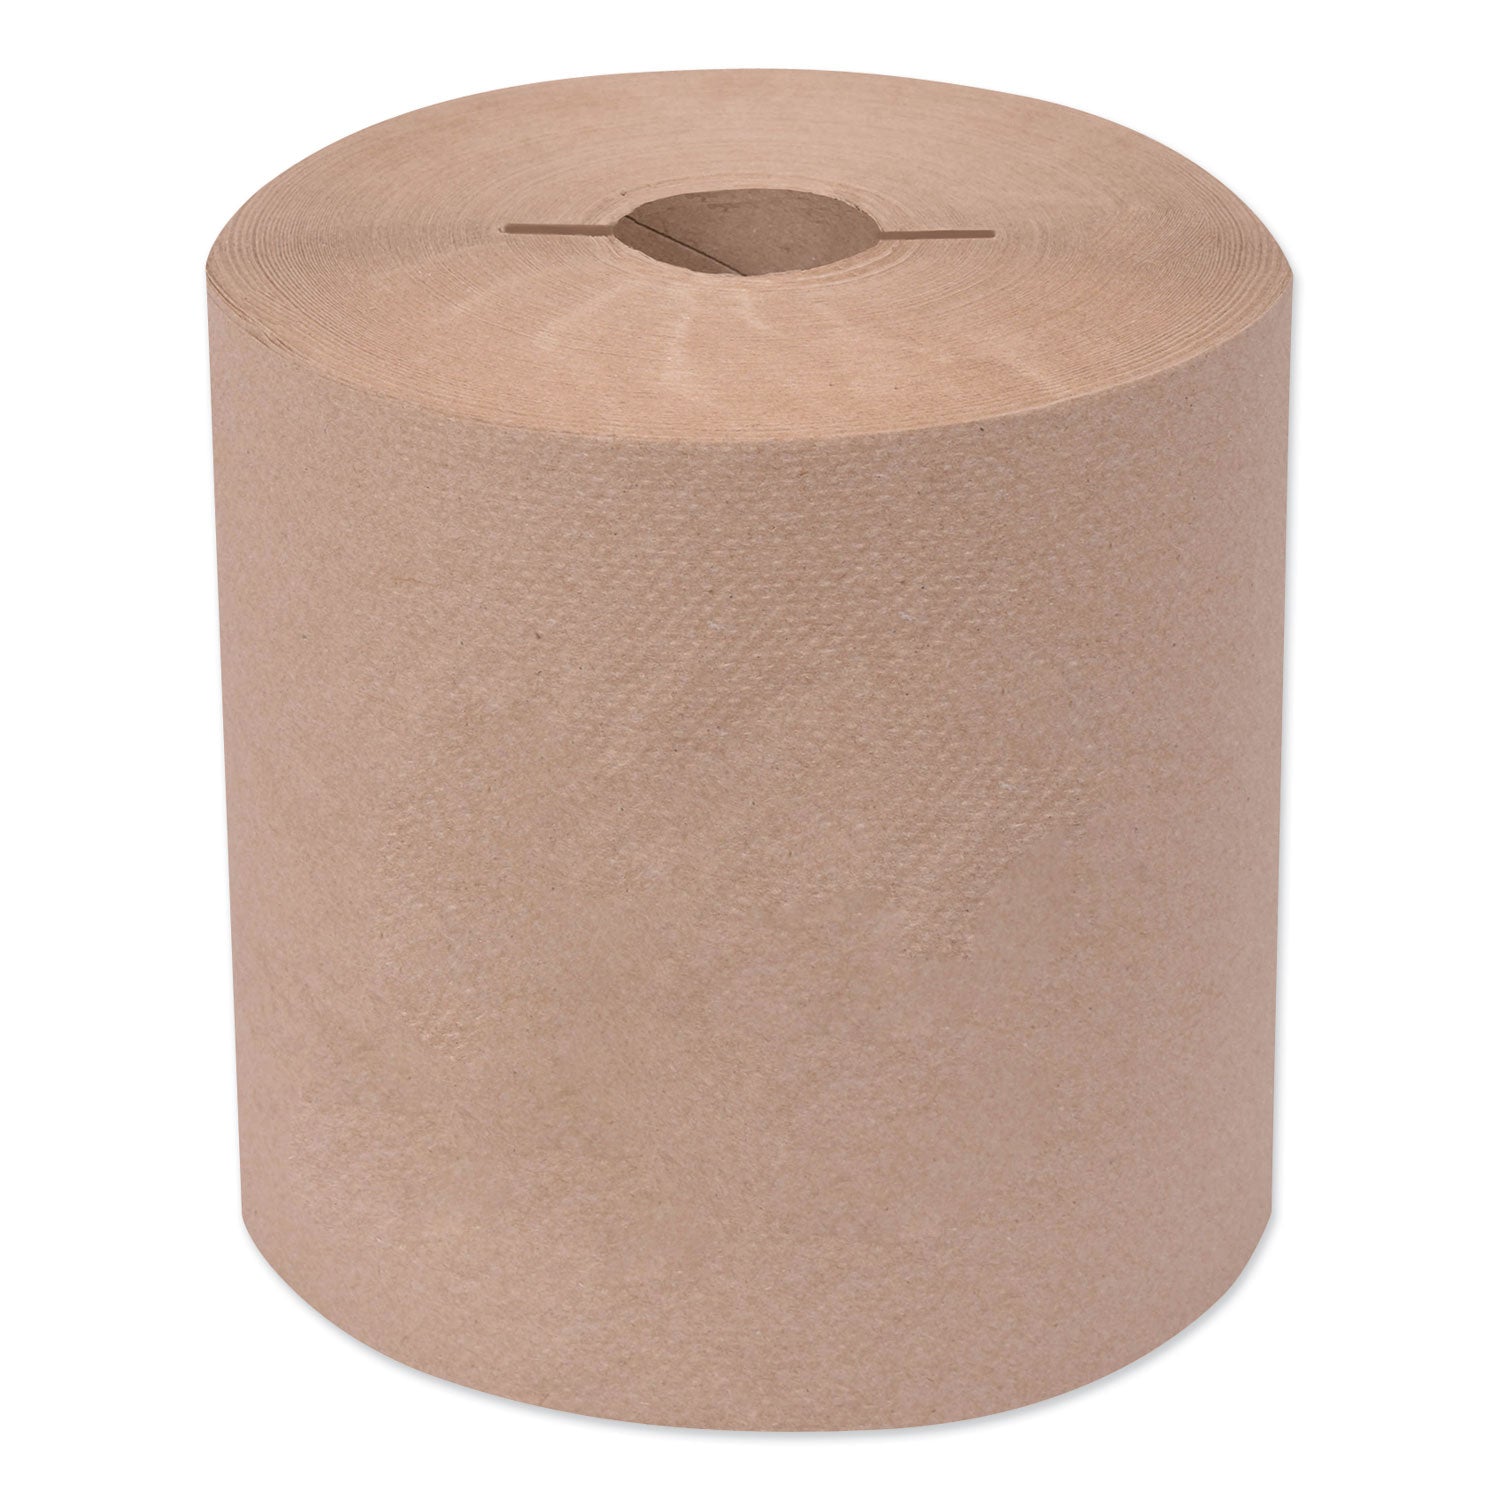 universal-hand-towel-roll-notched-1-ply-75-x-800-ft-natural-6-rolls-carton_trk7171300 - 1